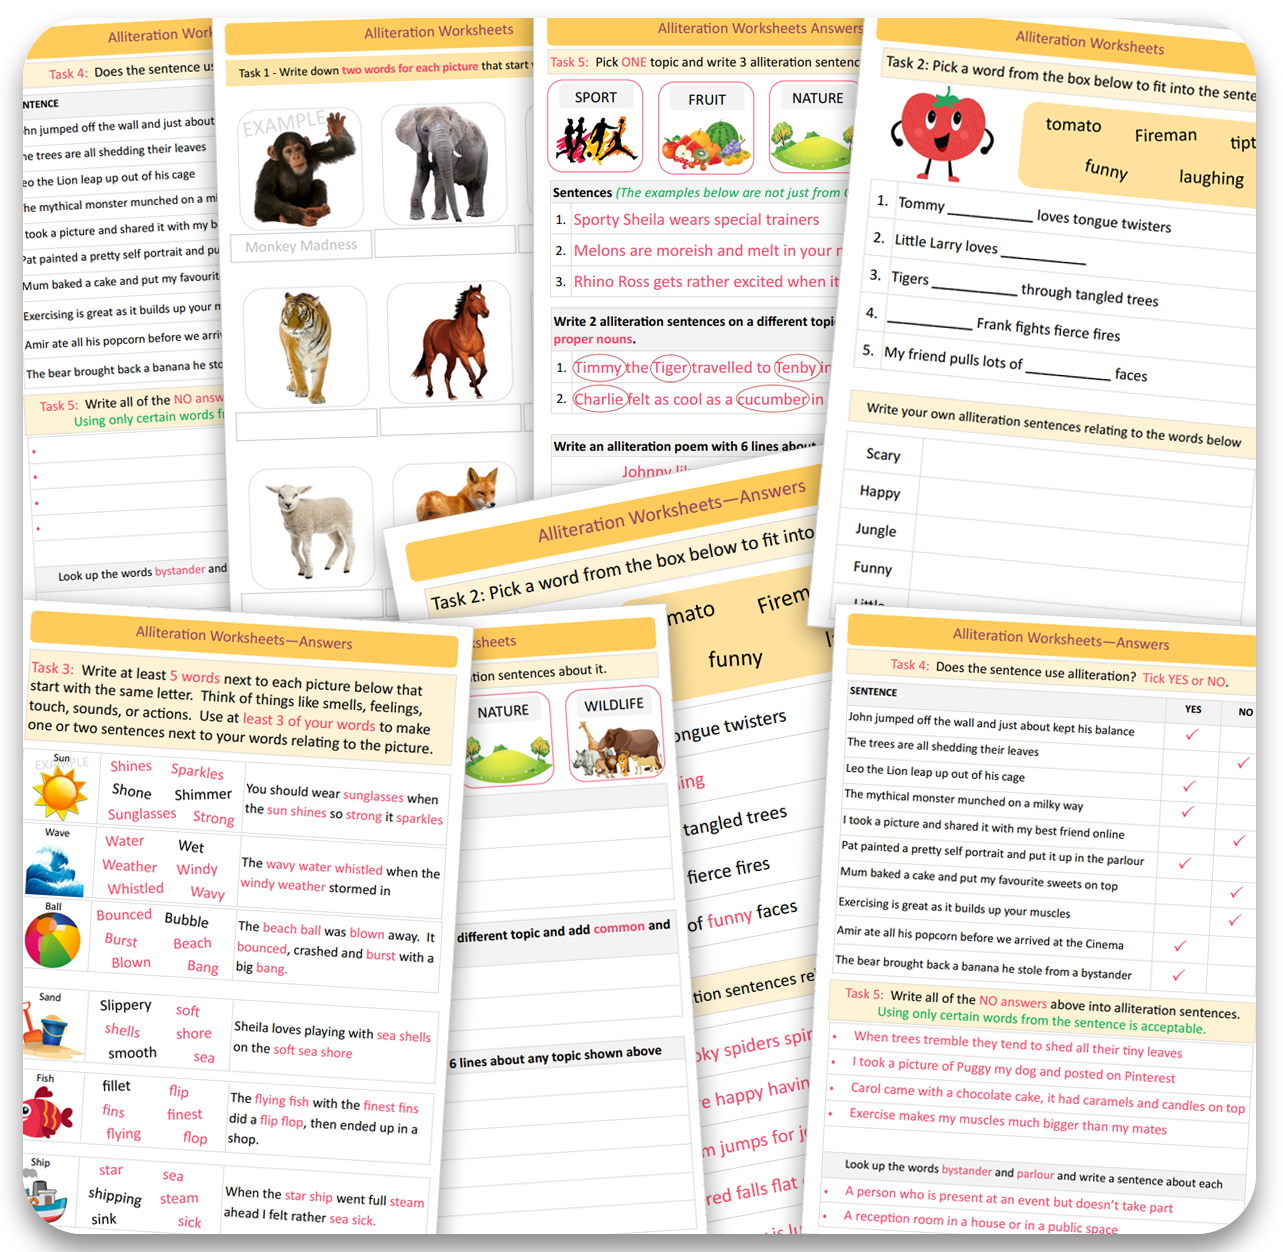 alliteration-literacy-worksheets-visual-tasks-with-answers-download-now